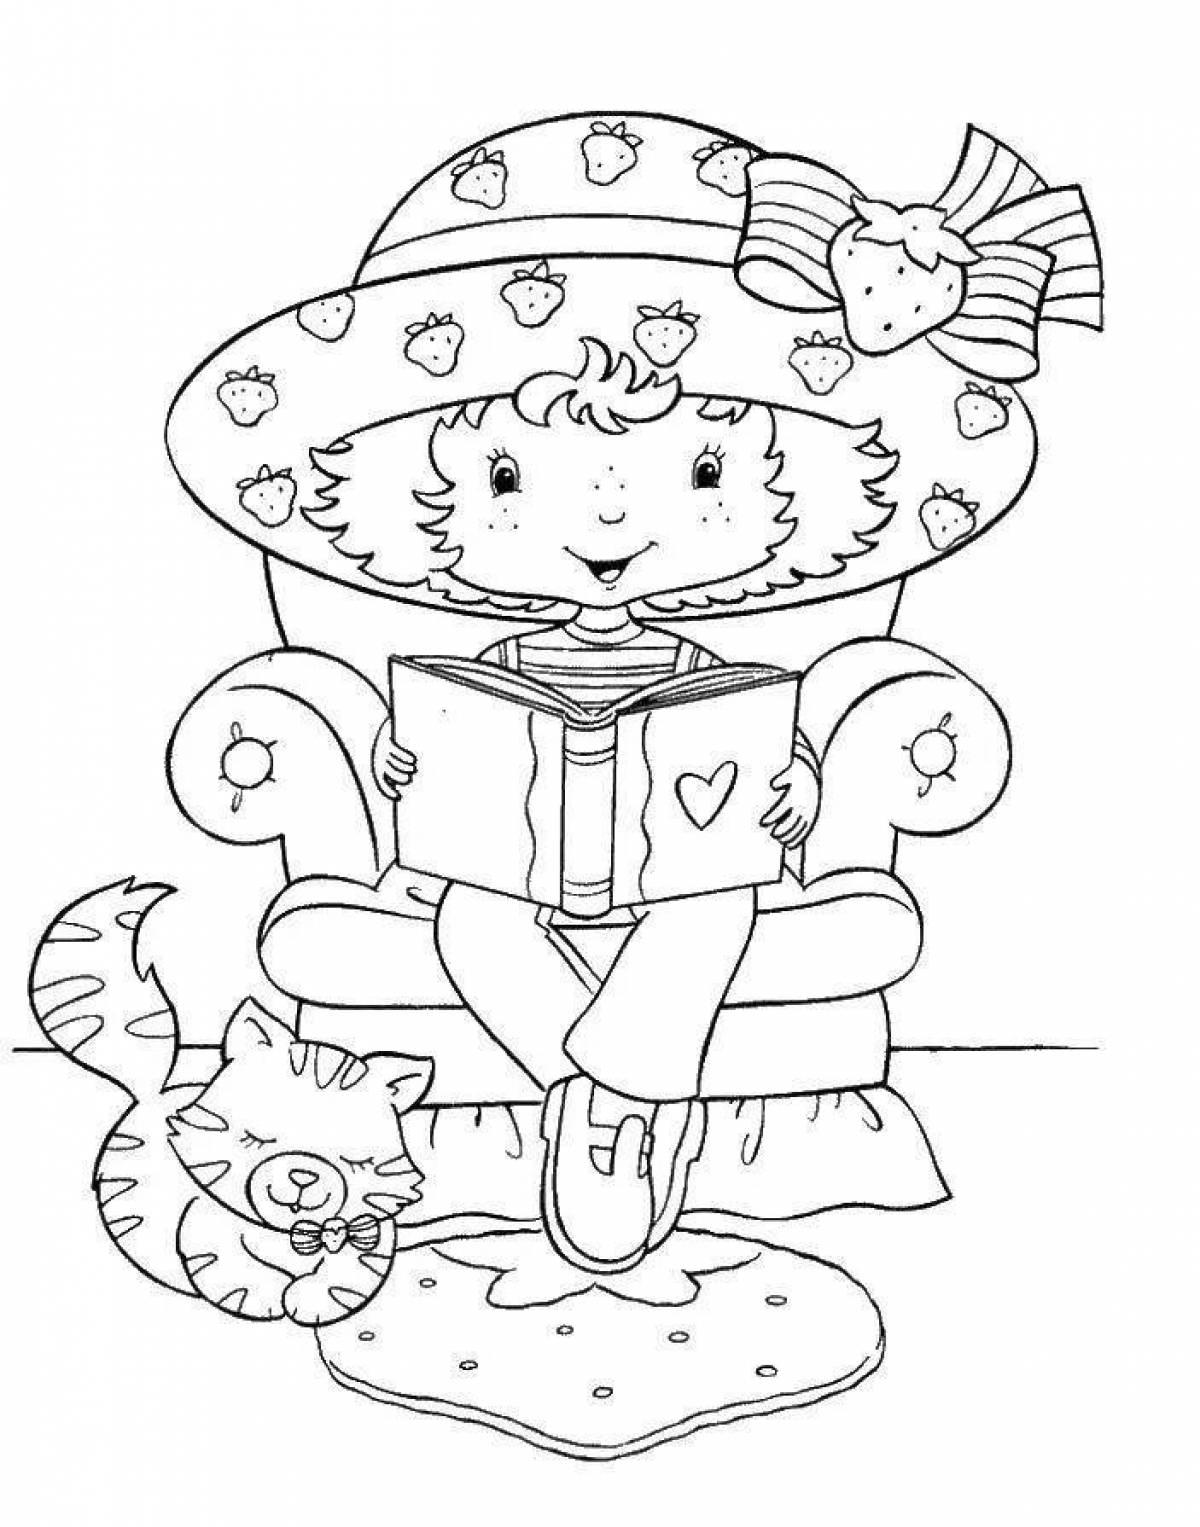 Coloring page poised the best